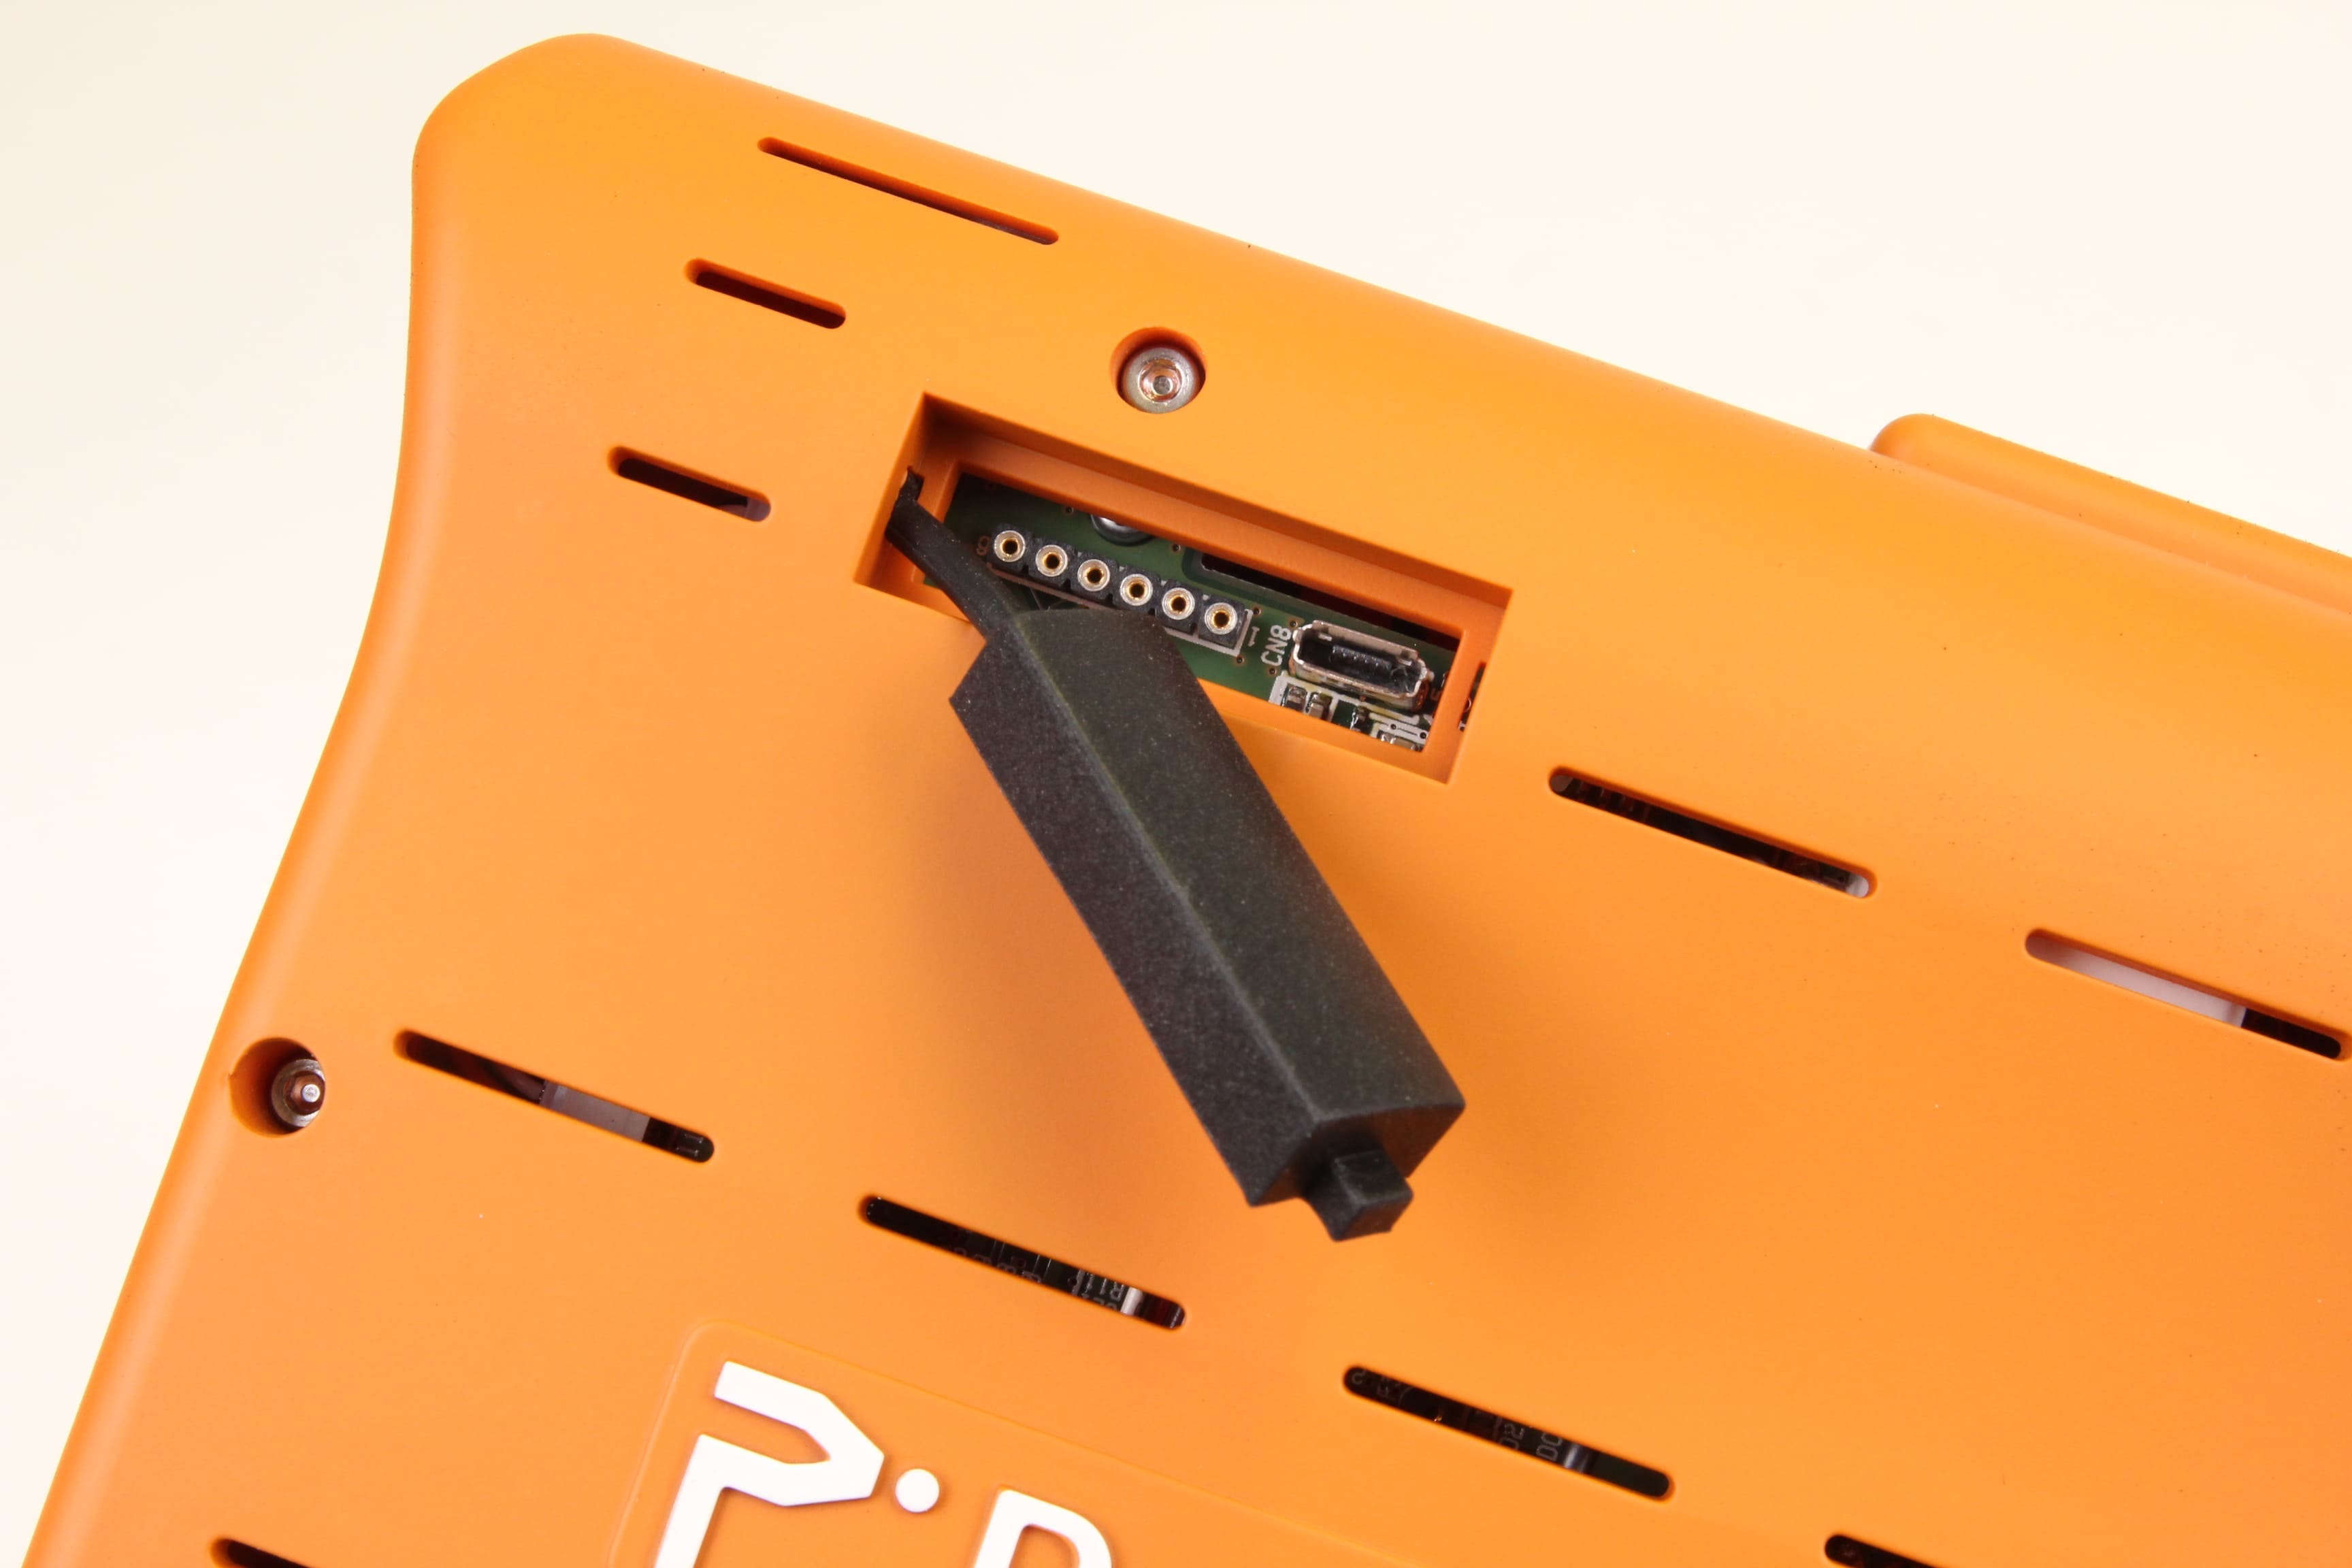 Image of various input ports for wiring on the Patmark-mini unit